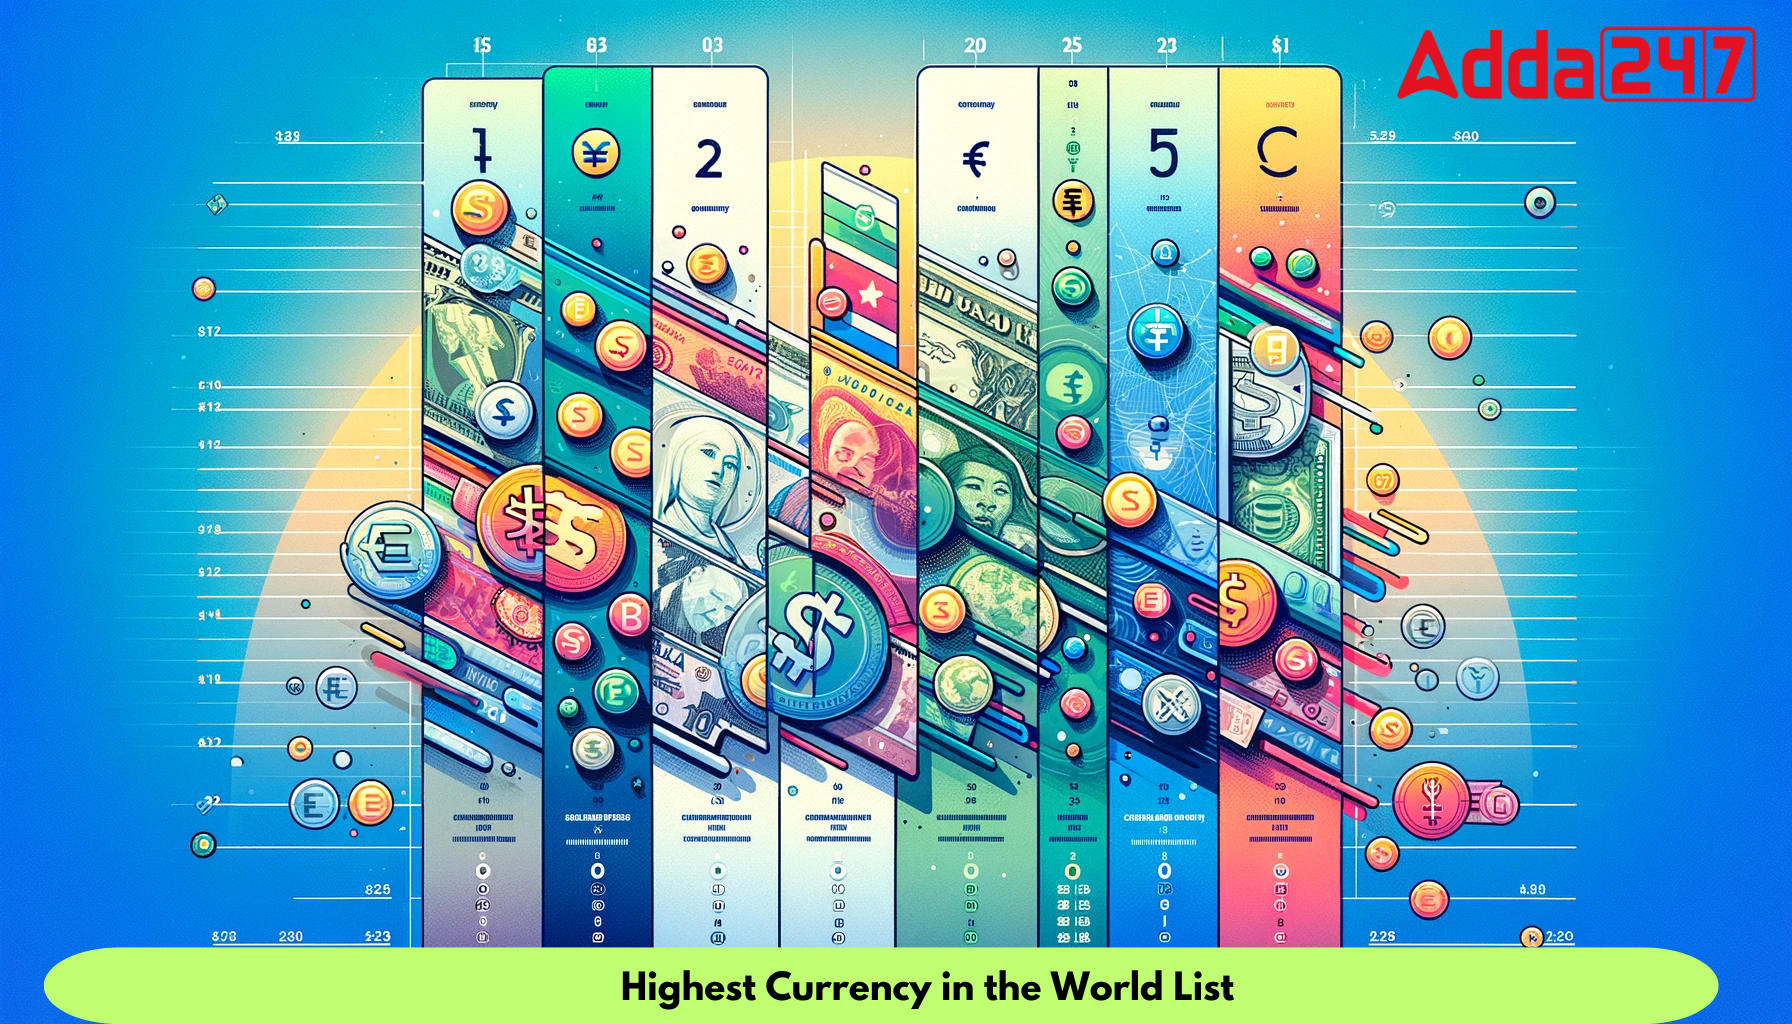 Highest Currency in the World List